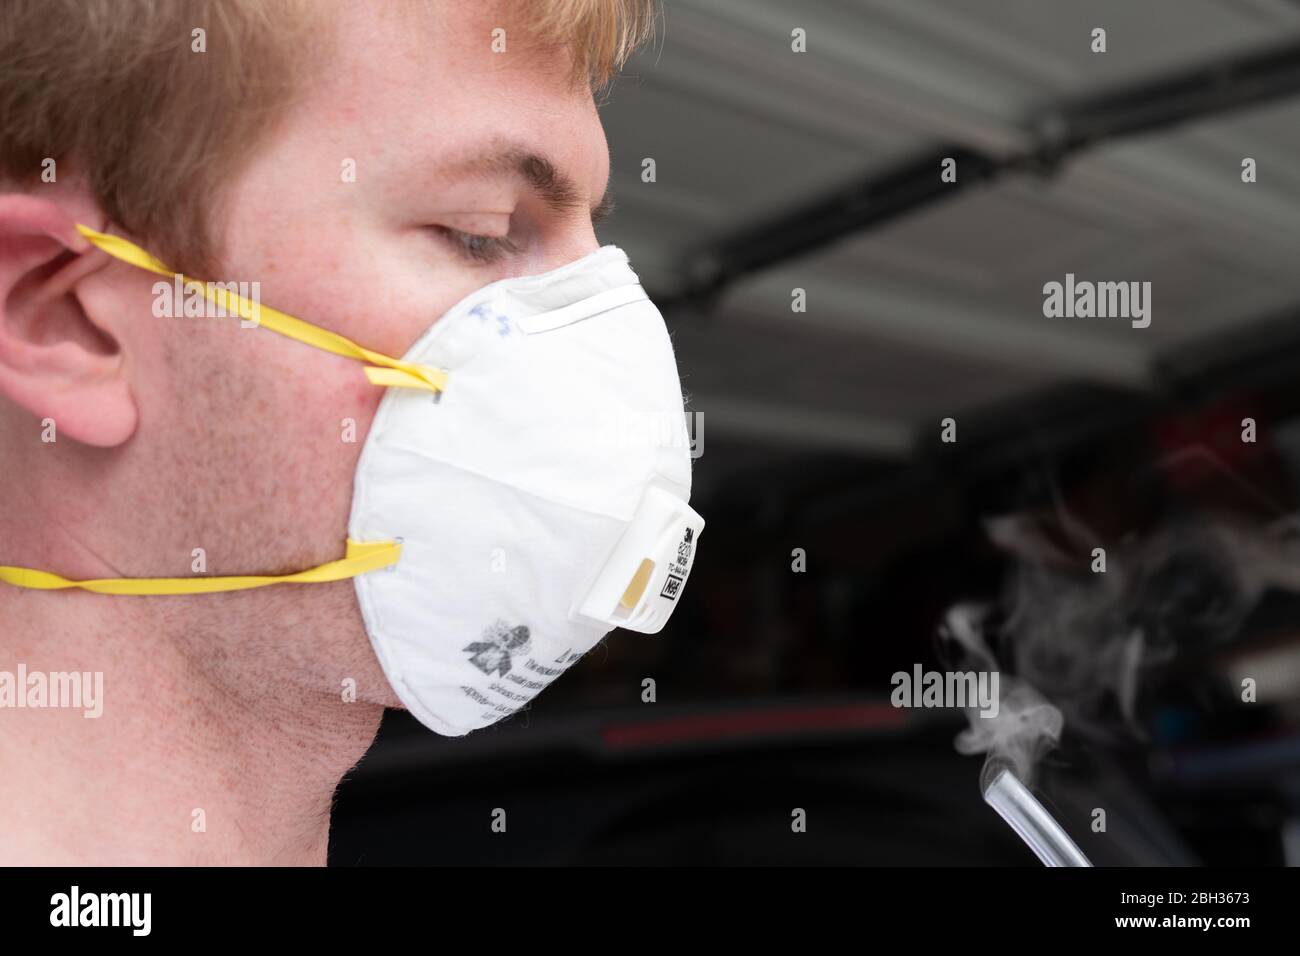 Allegro brand stannic chloride aspirator expelling vapor during fit test of N95 mask, San Ramon, California, with test subject's face visible, April 17, 2020. N95 masks are commonly used in the treatment of COVID-19 coronavirus by medical professionals, and are often fit tested before use with infectious patients. Stannic chloride is typically used for N100 masks, but is shown here for illustrative purposes. () Stock Photo